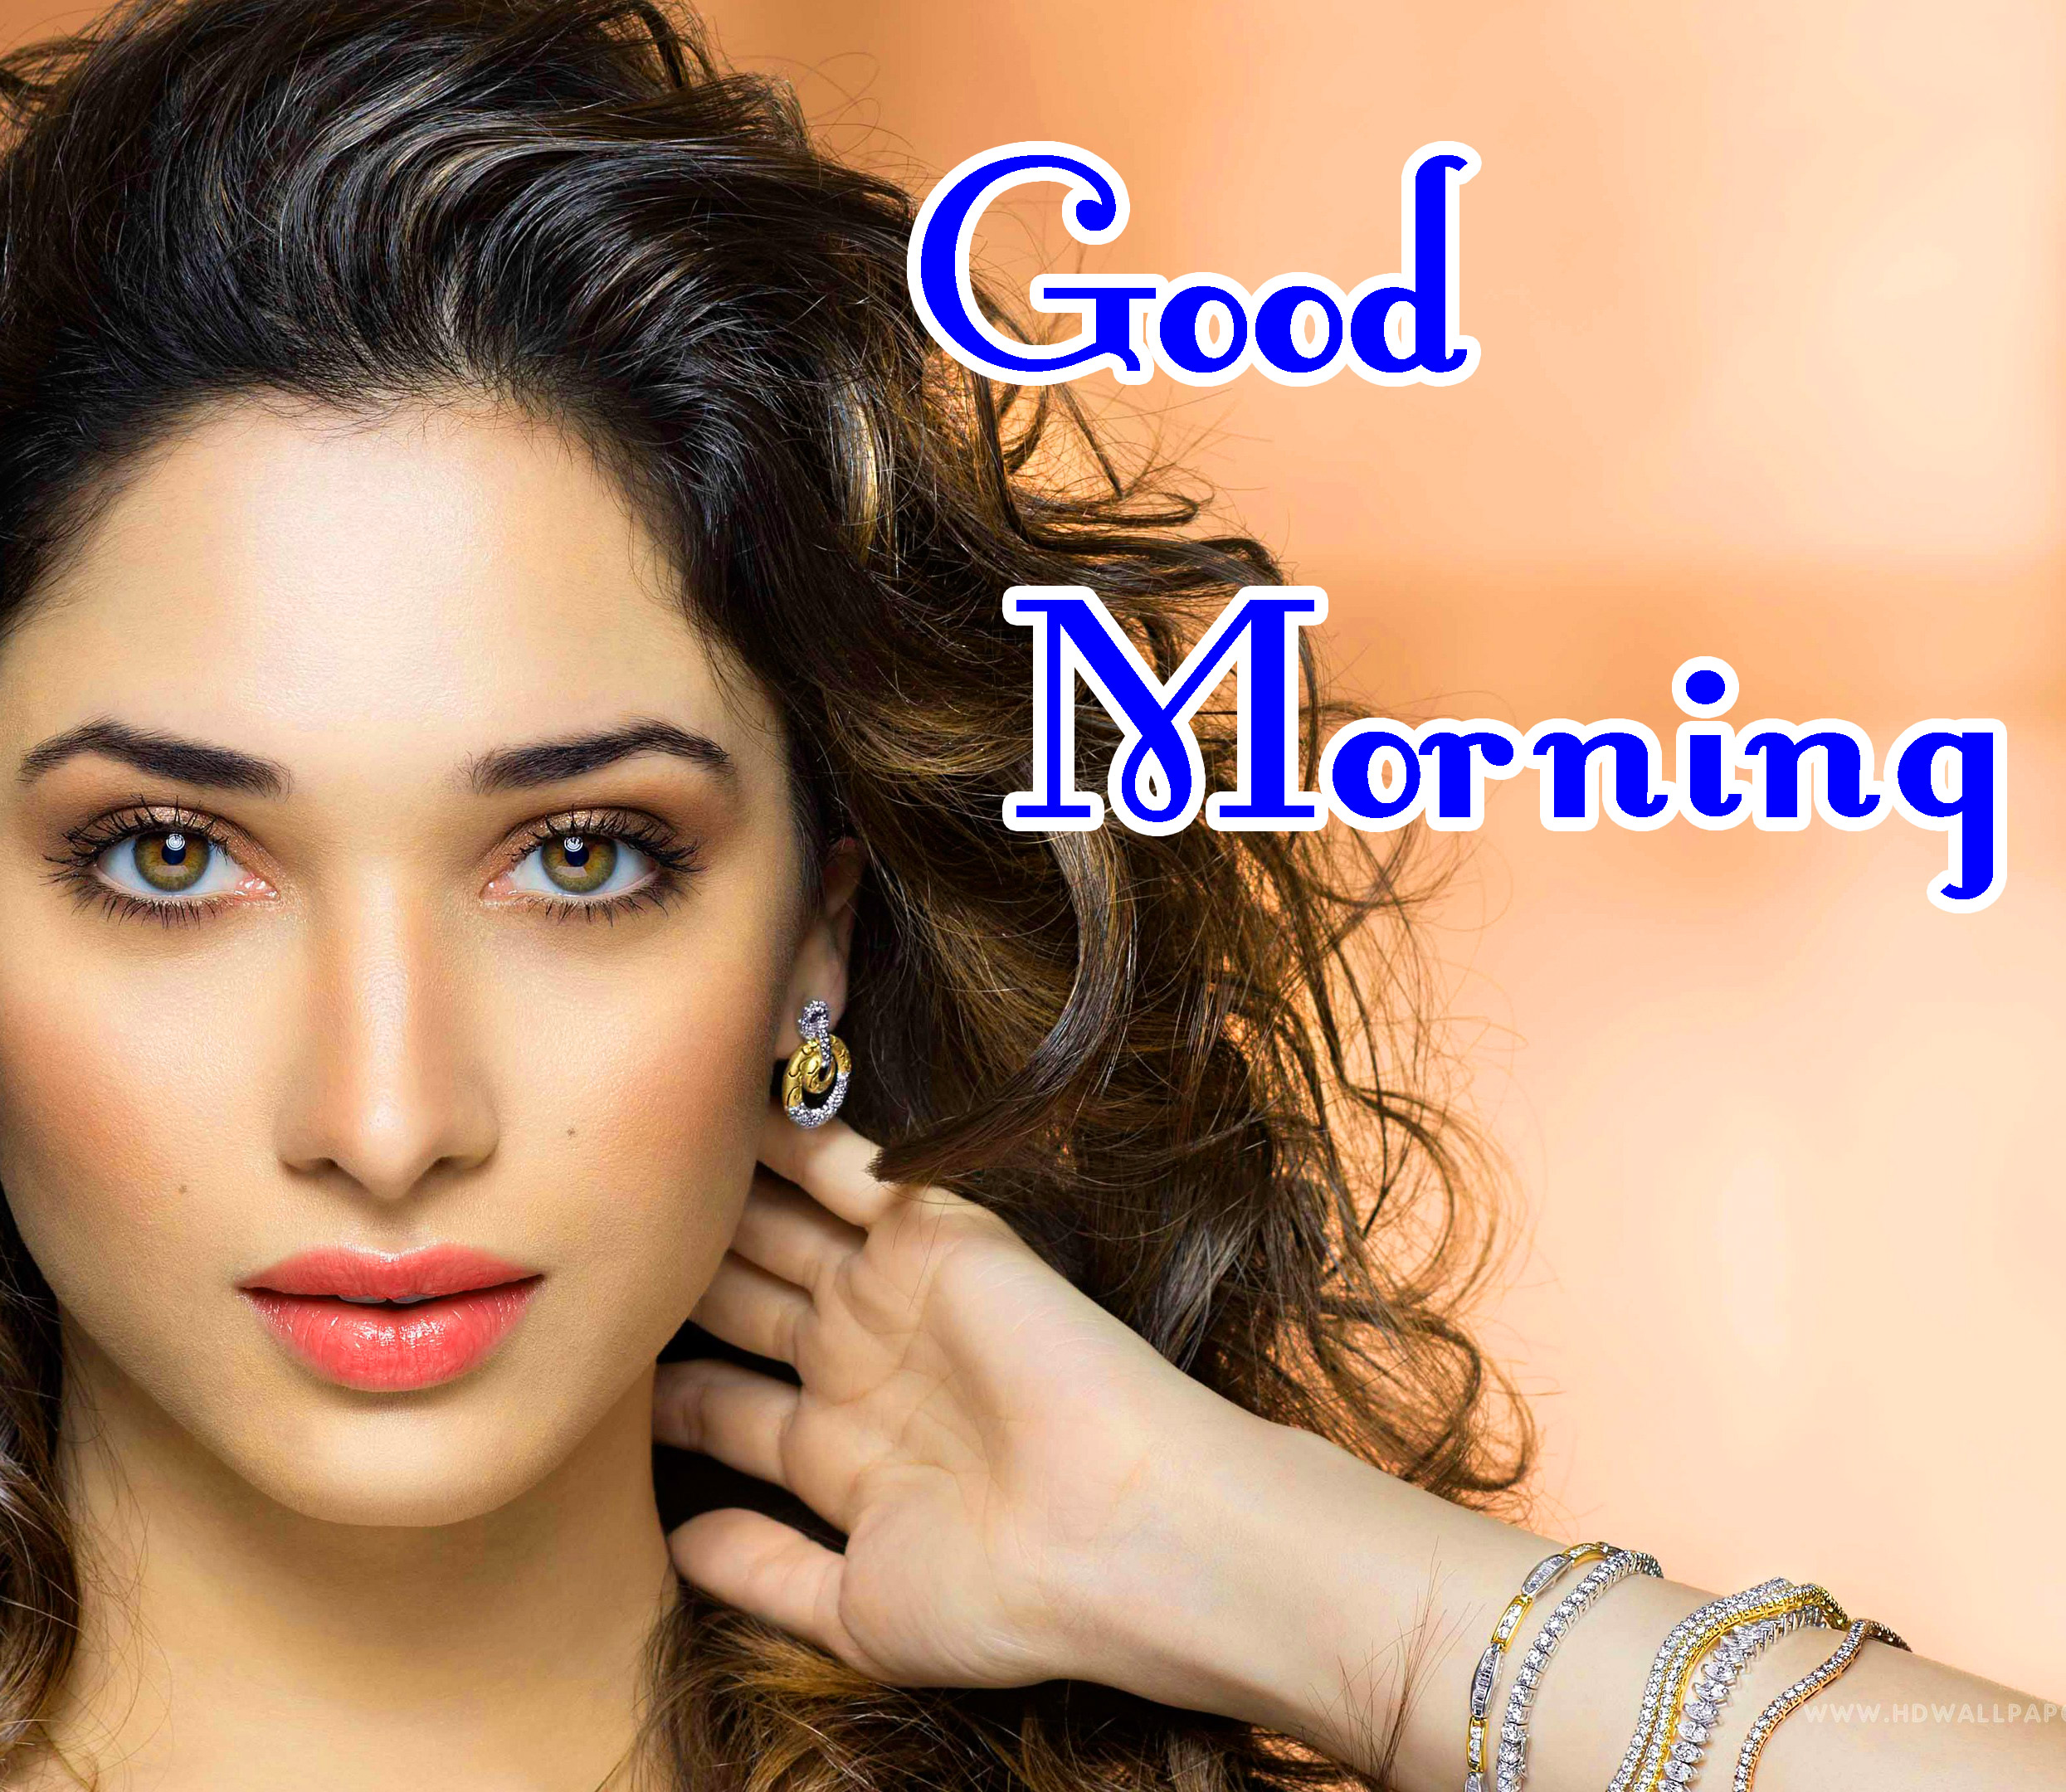 Most Beautiful Girl In the World Good Morning photo for Facebook